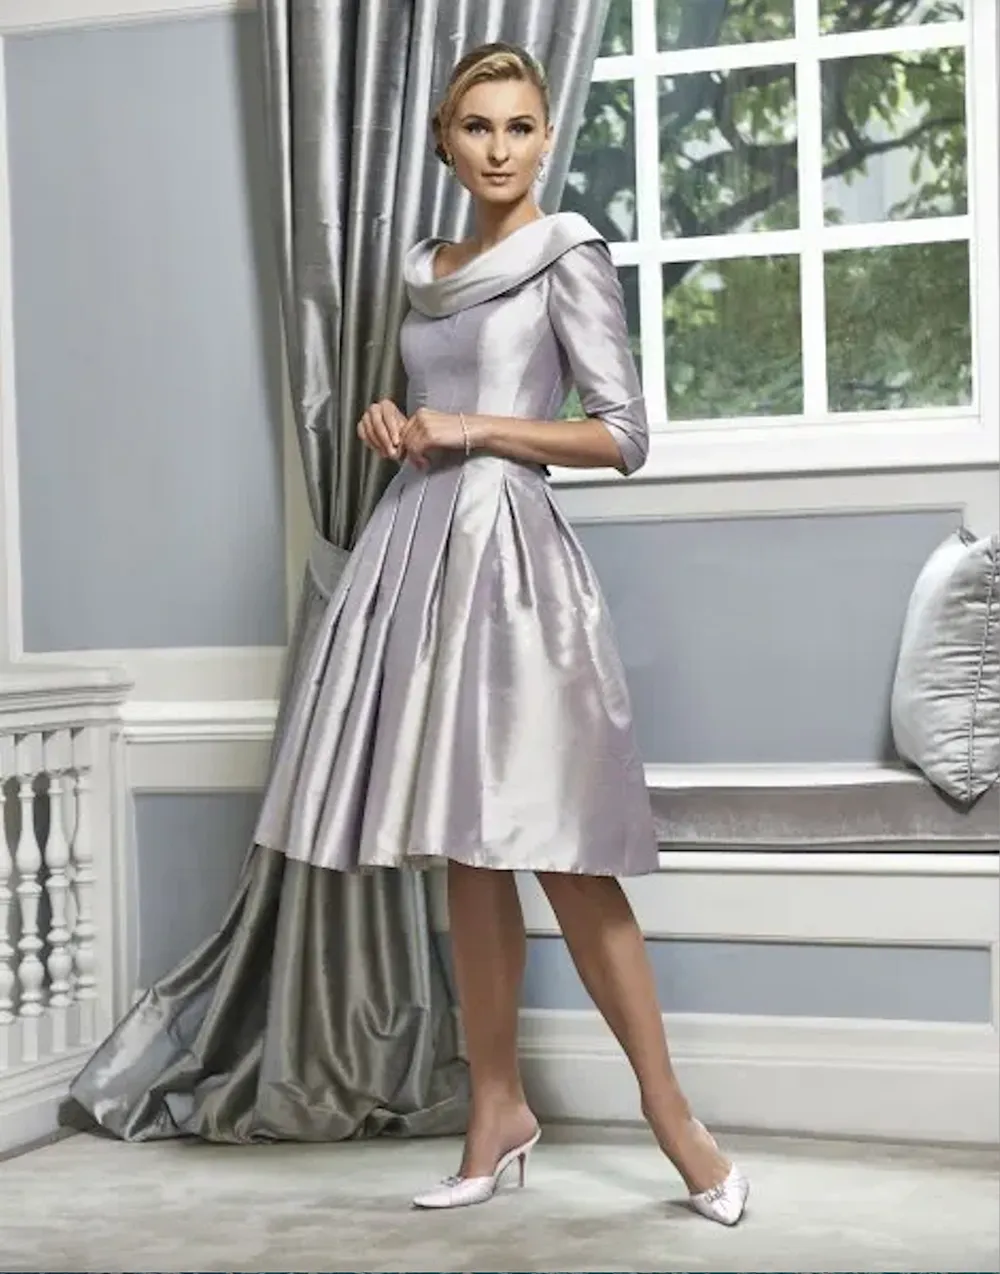 silver mother of bride dresses